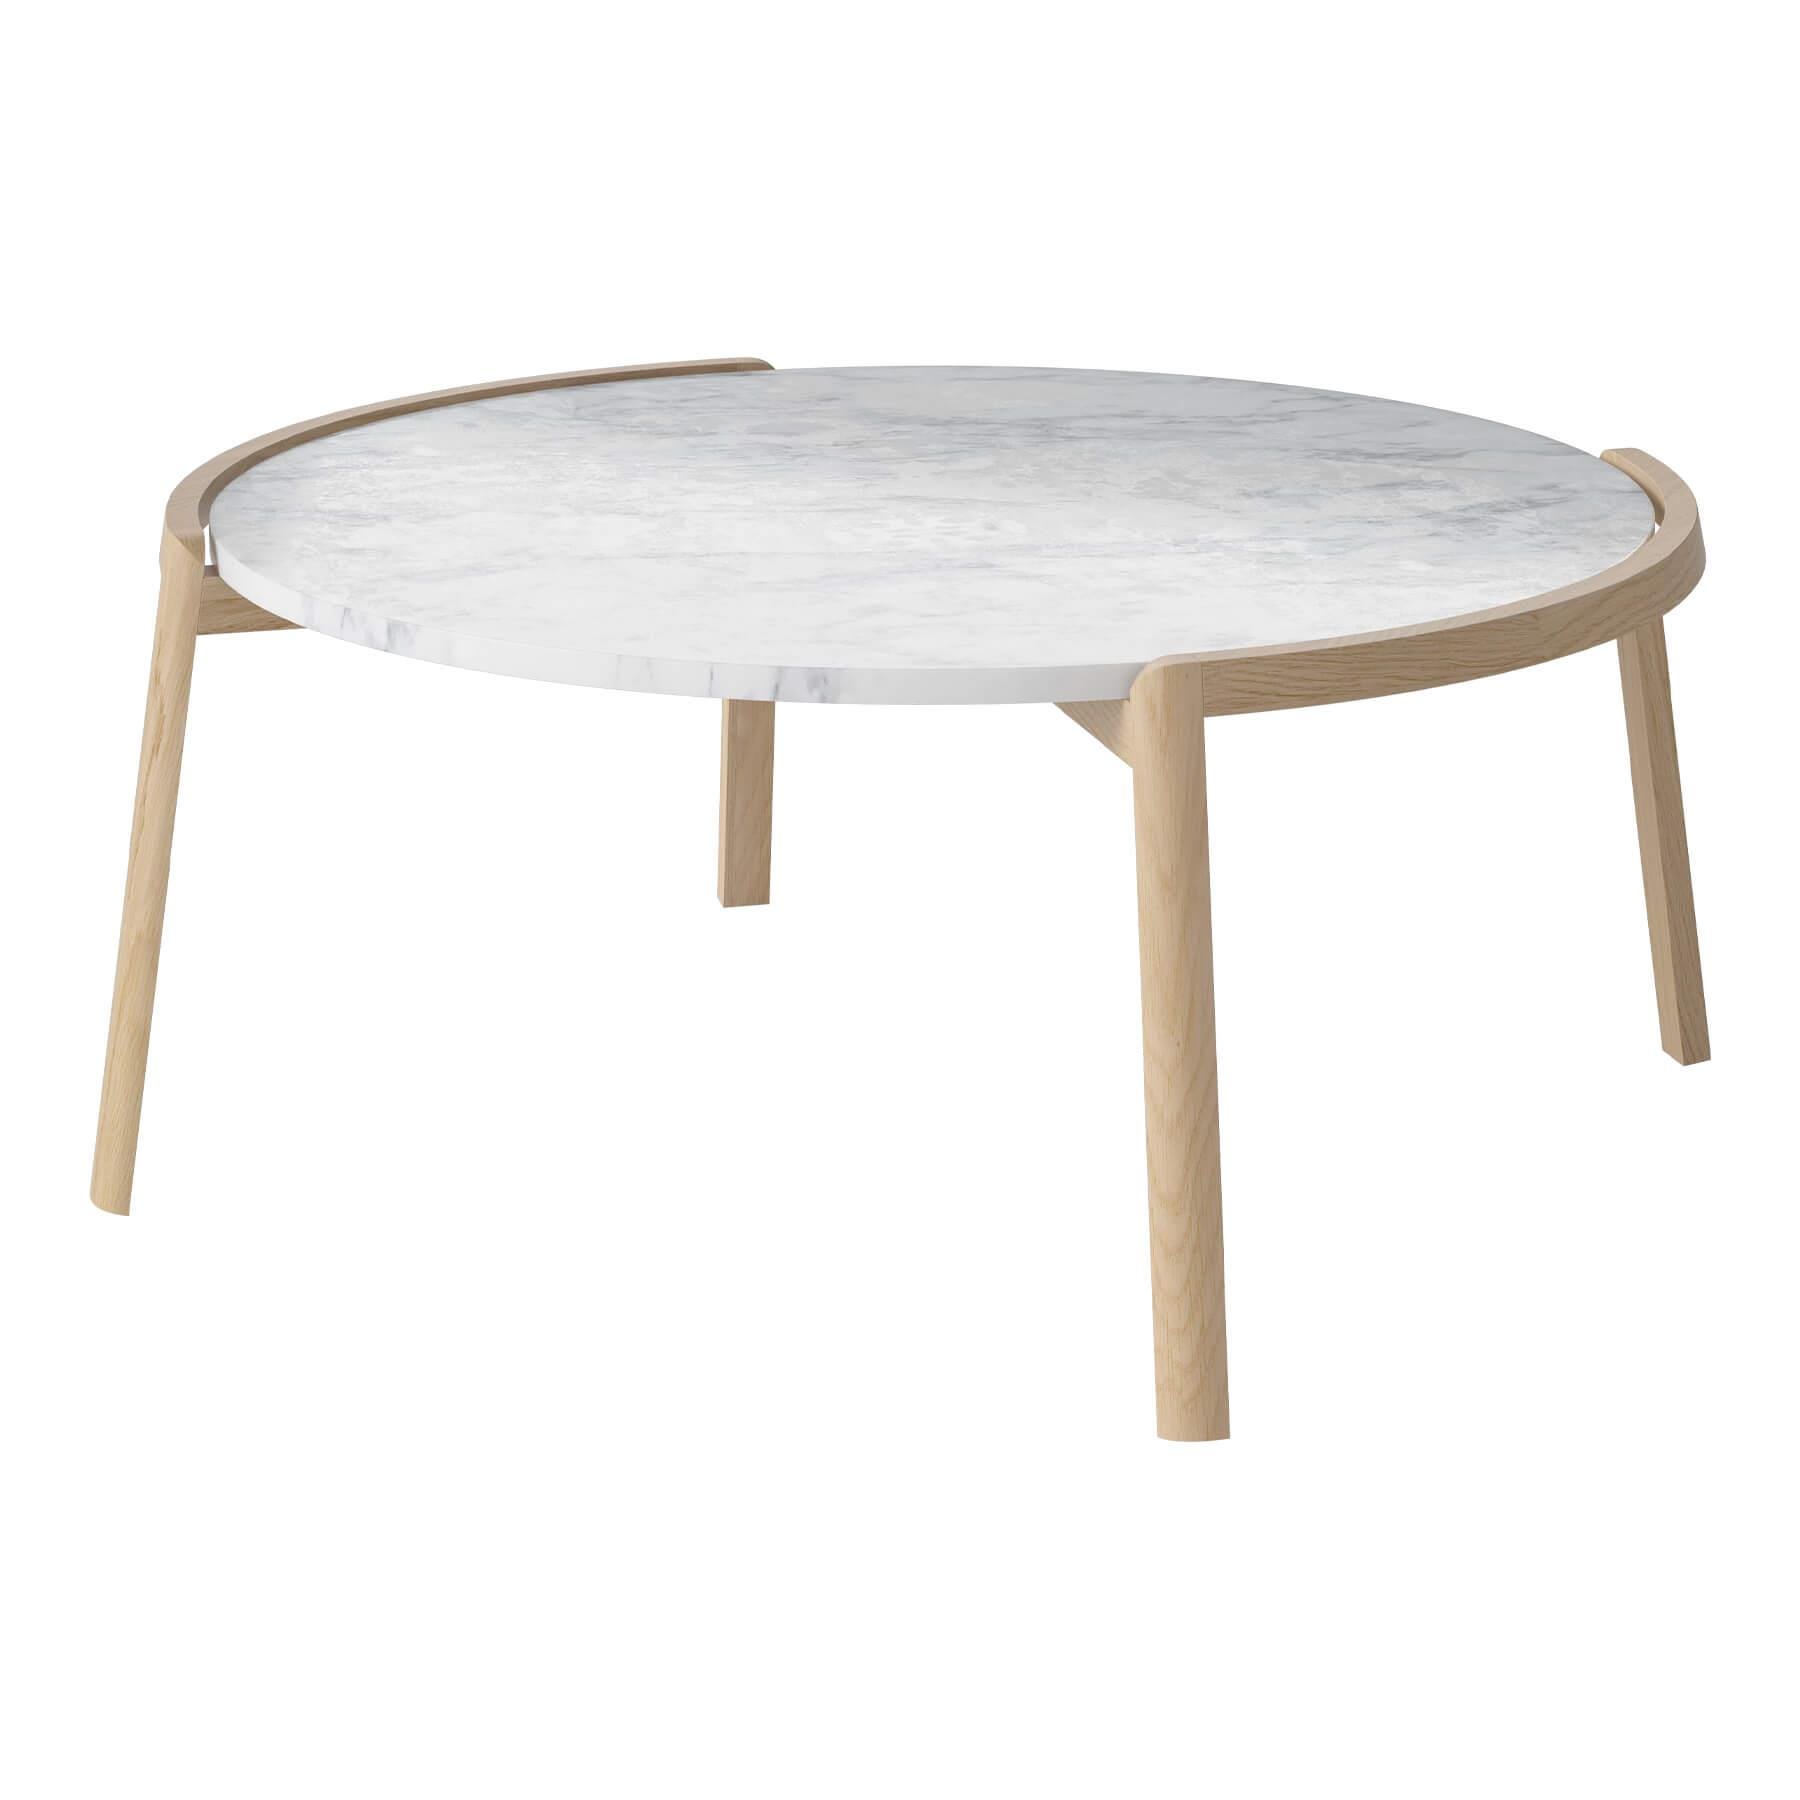 Bolia Mix Coffee Table Large White Oiled Legs Grey White Marble Designer Furniture From Holloways Of Ludlow